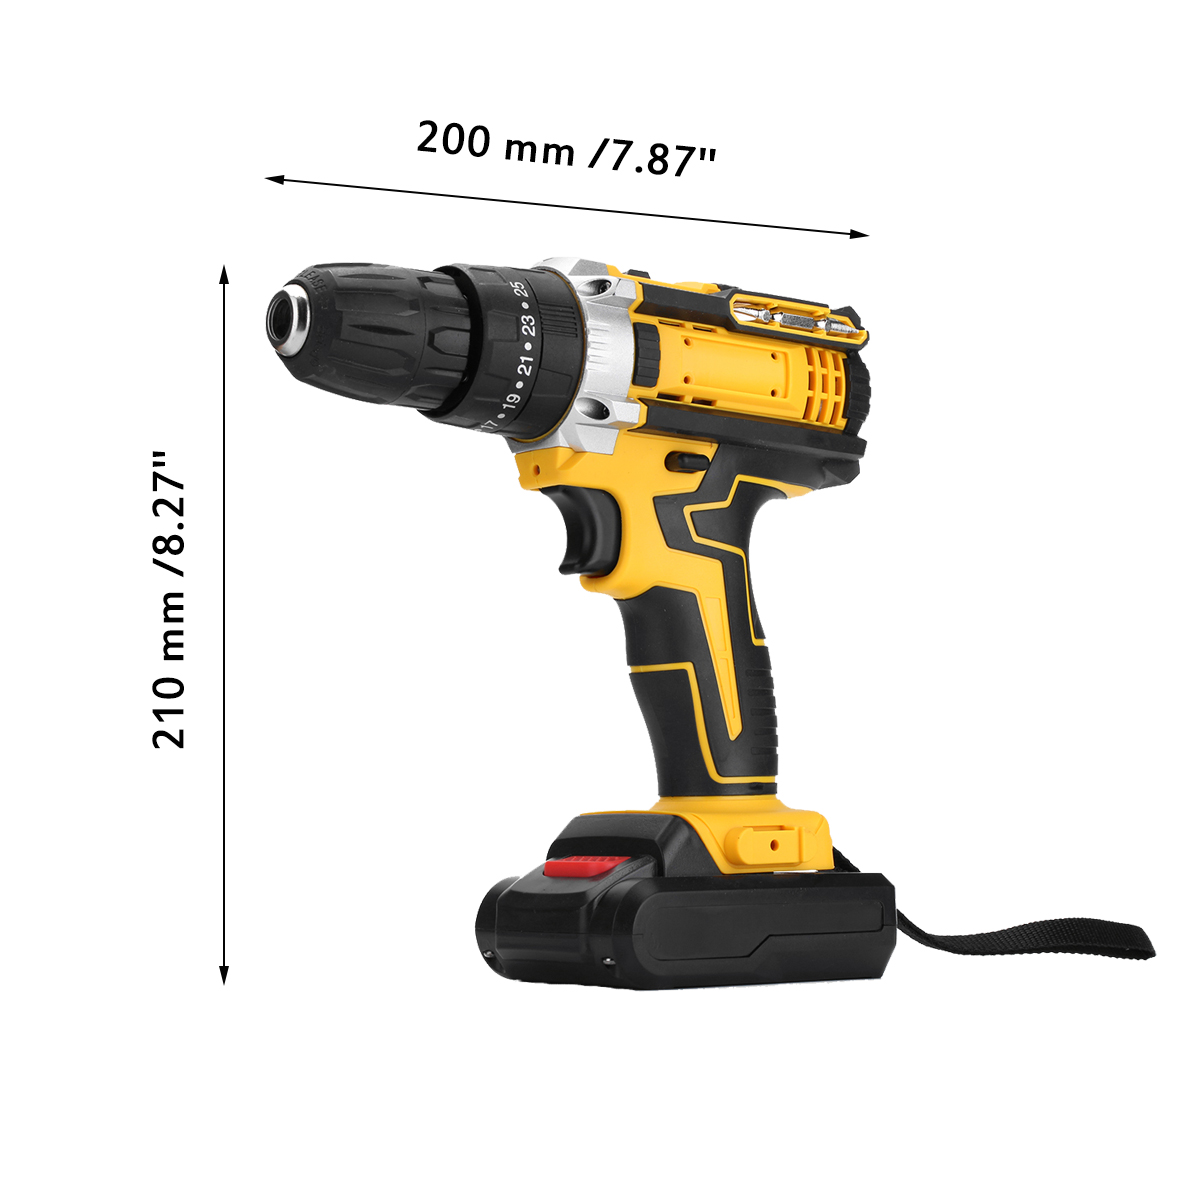 3-IN-1-Electric-Cordless-Impact-Hammer-Drill-Screwdriver-38Nm-High-Torque-Tool-1780452-7